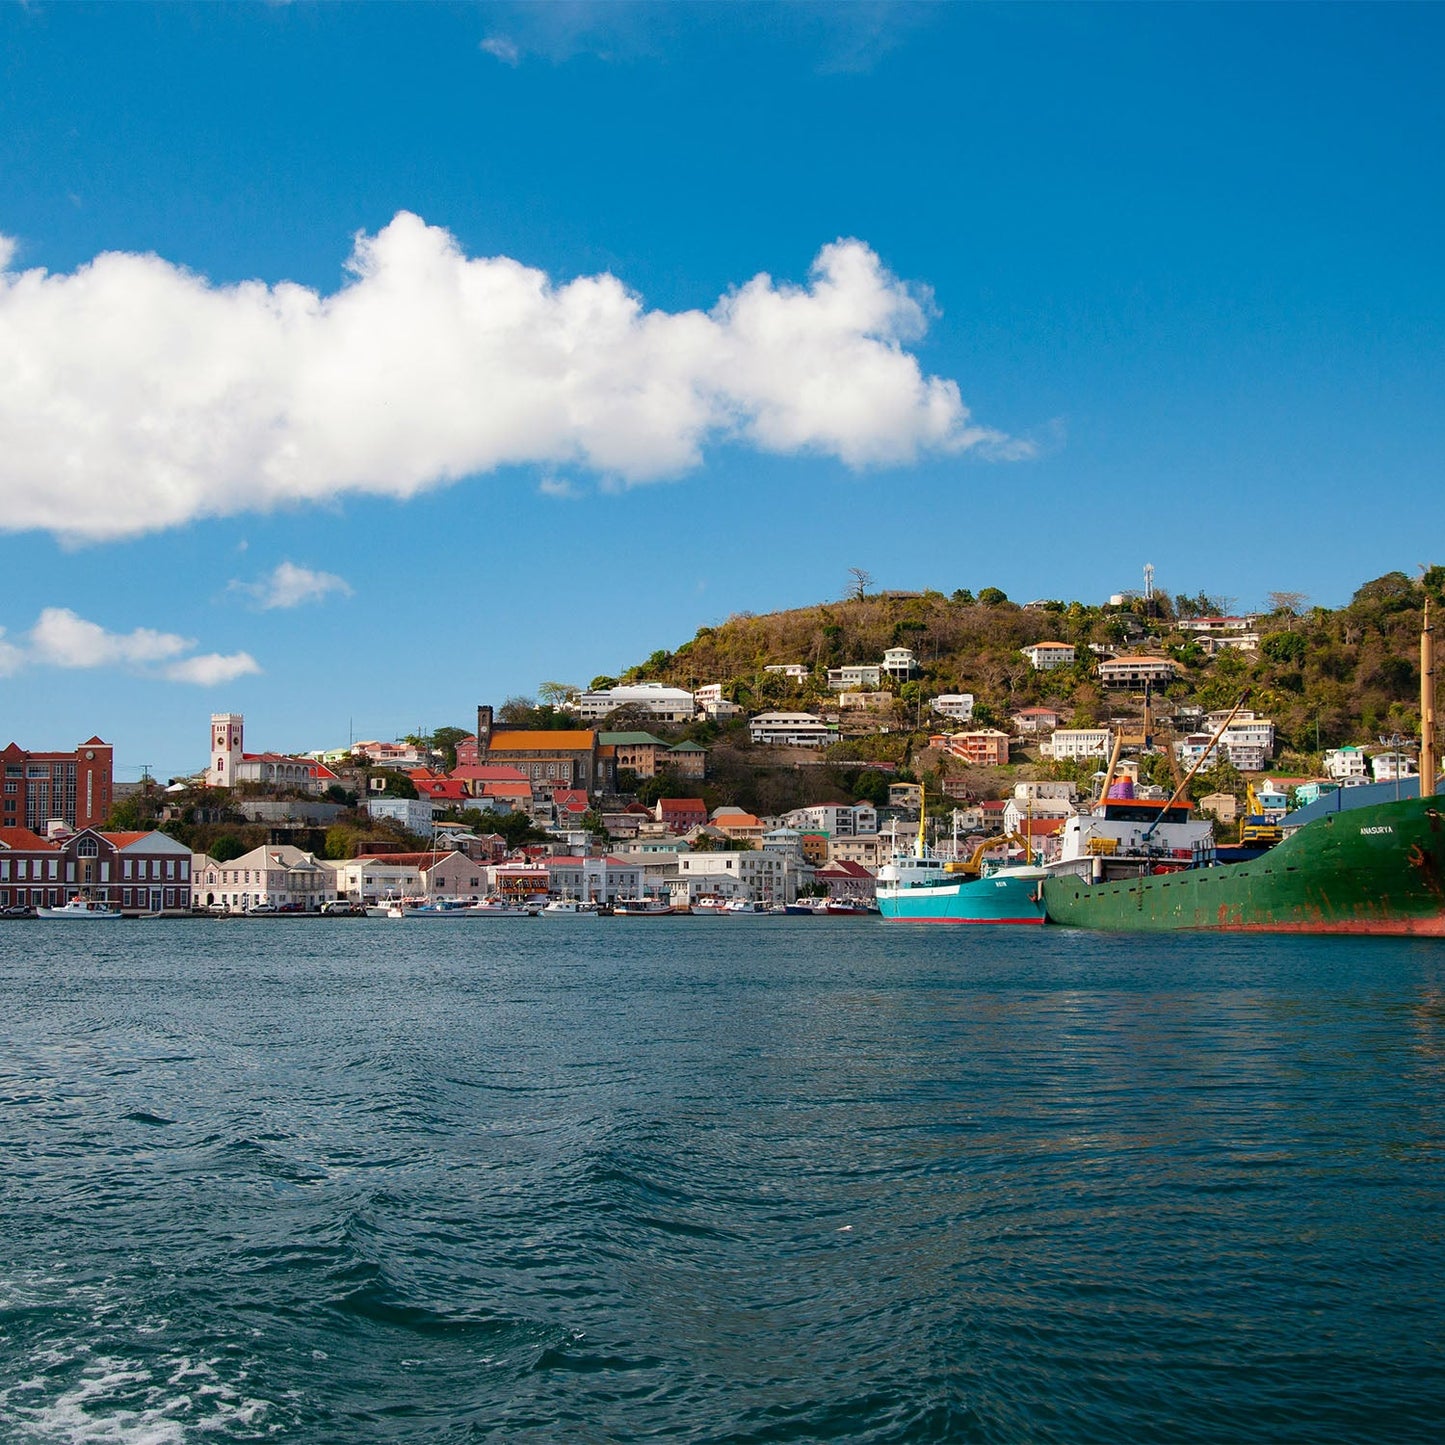 View of St George's, Grenada